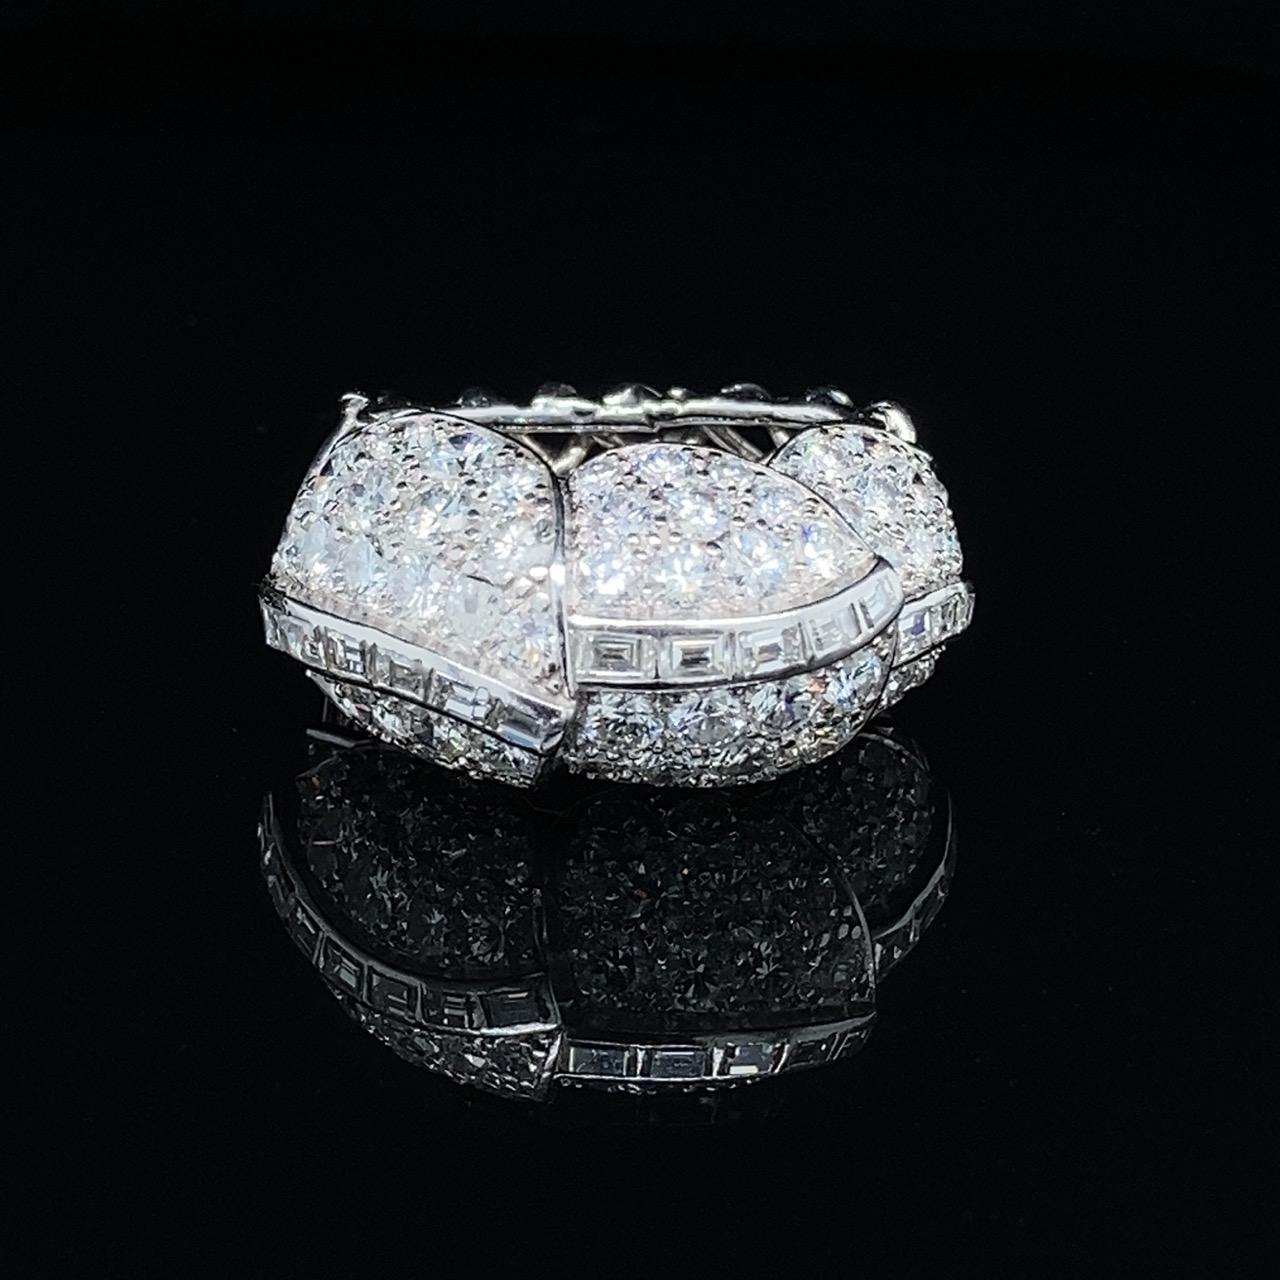 Cartier Retro Diamond Feathers Ring, ca. 1940s

A beautiful Cartier diamond ring from the 1940s. The ring has three central diamond elements following the design of feathers, studded with round brilliant cut and tapered baguette cut diamonds of ca.